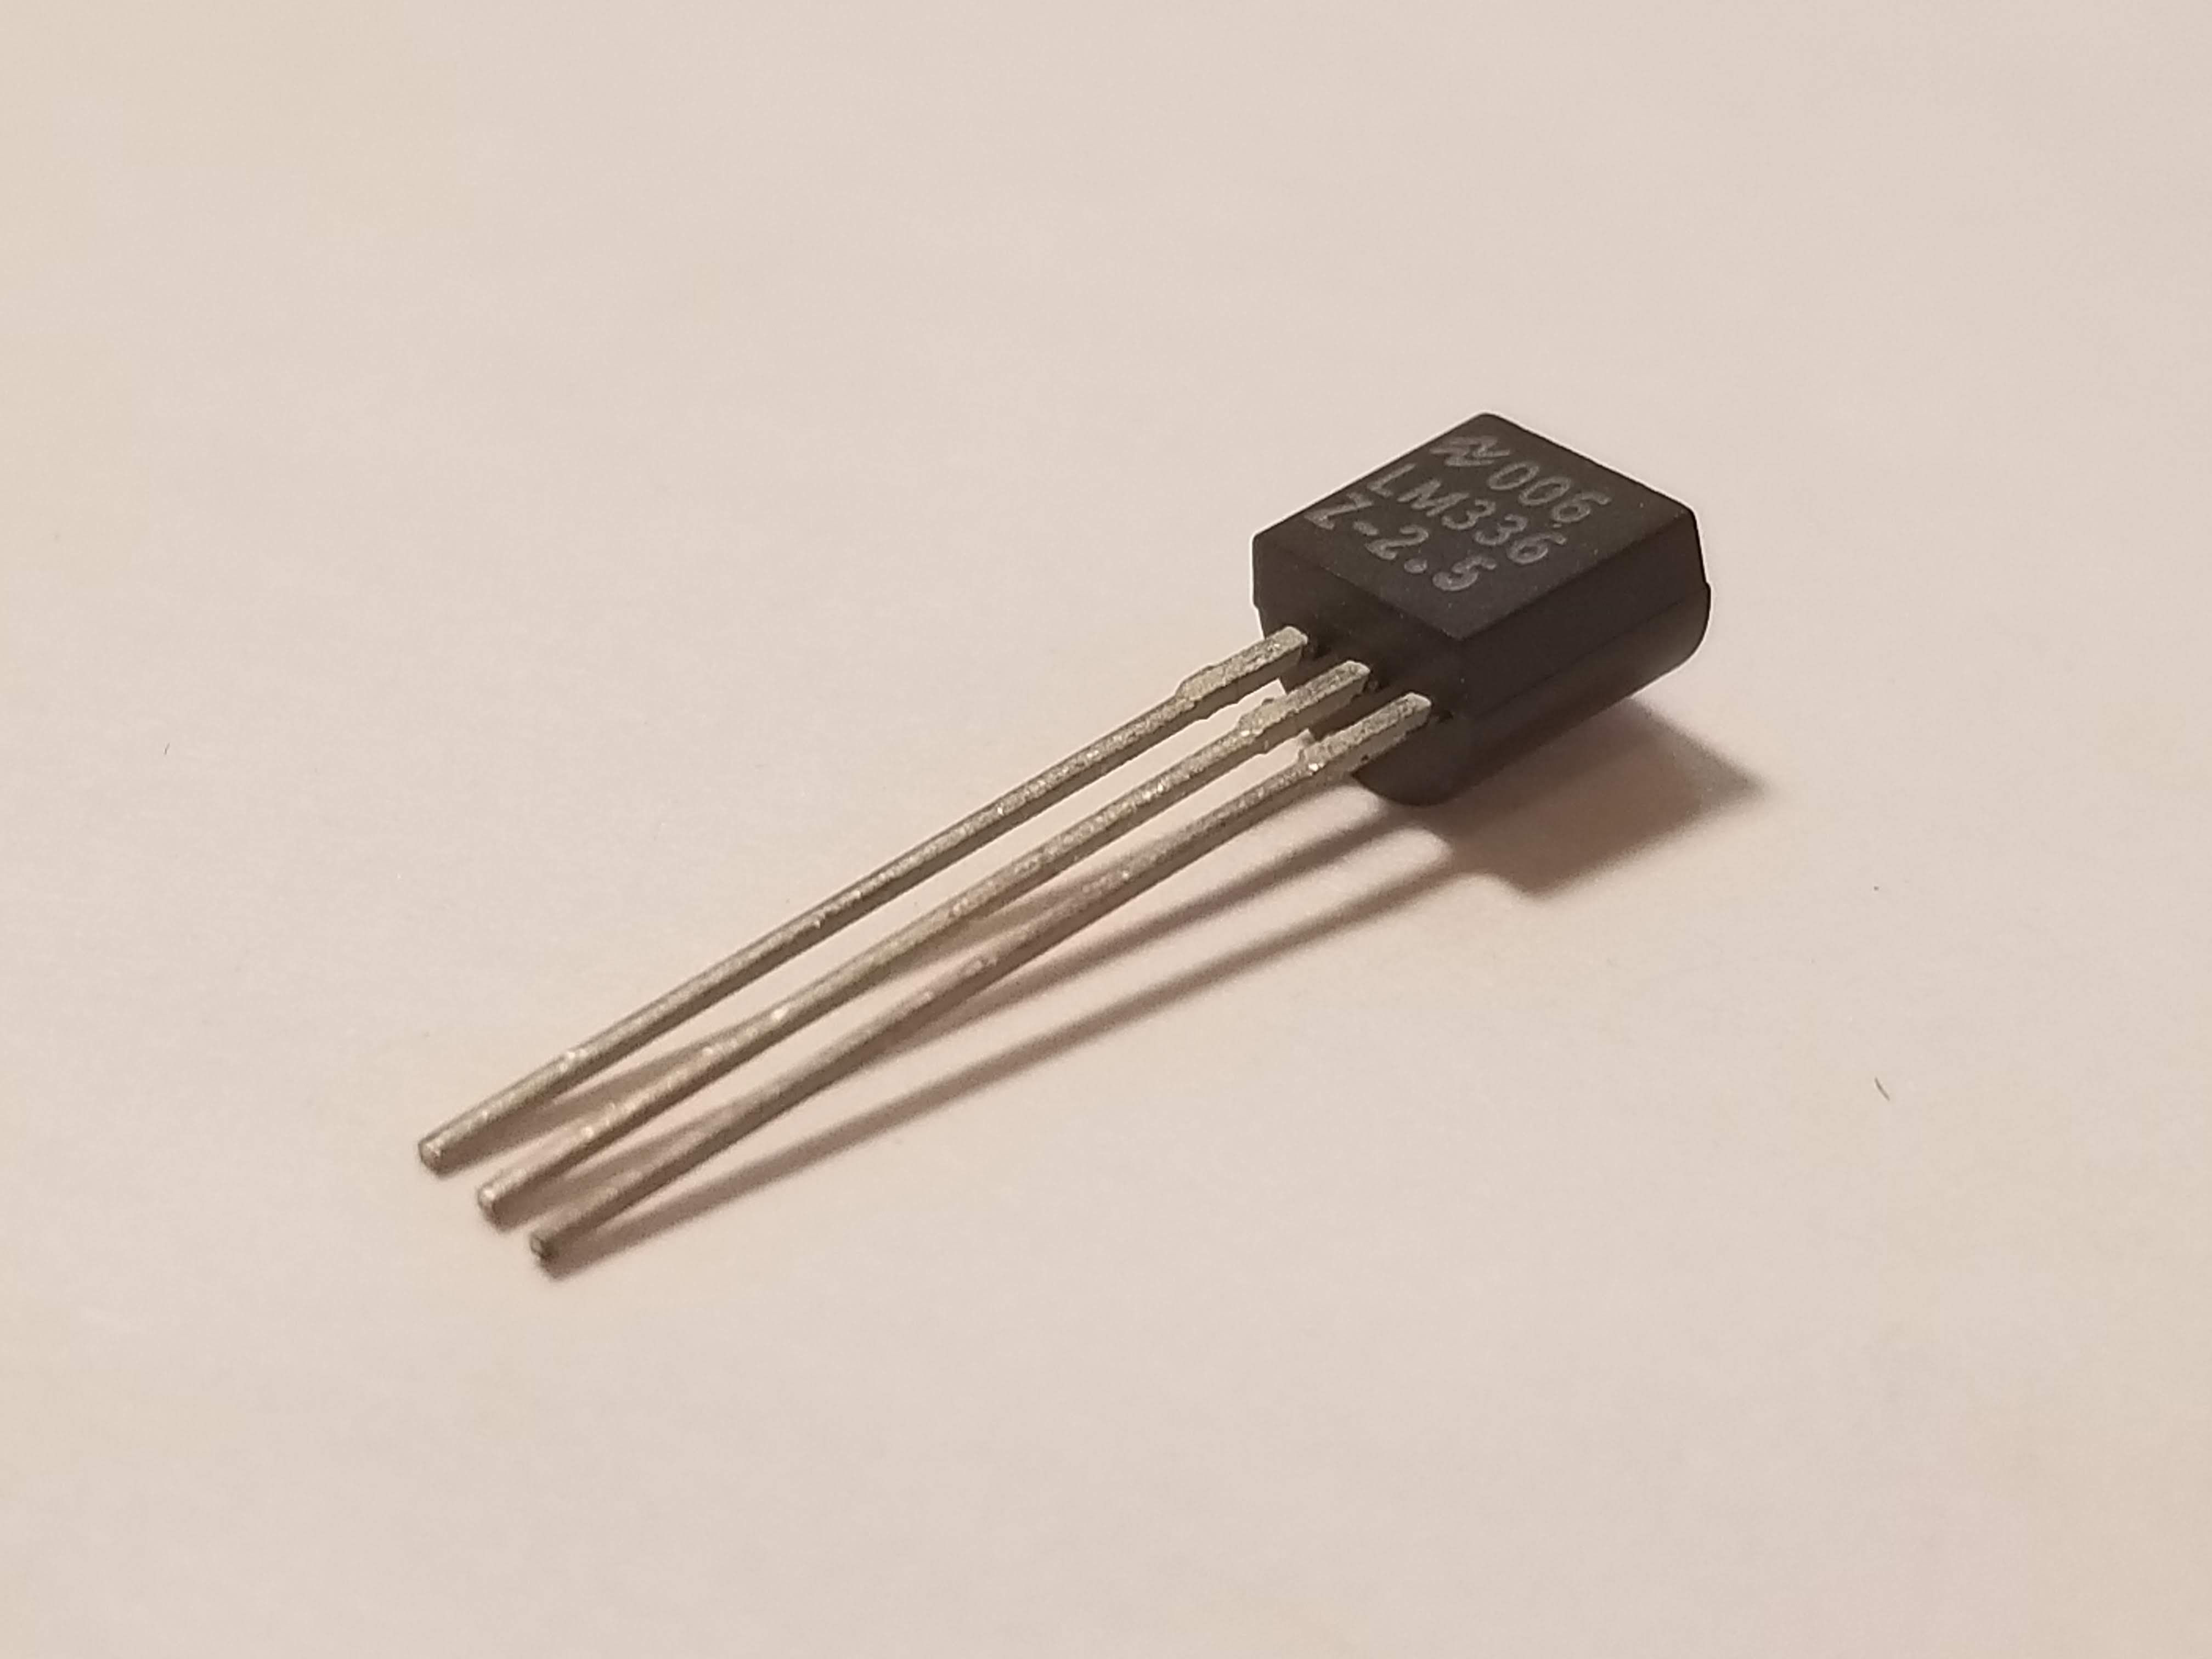 Picture of LM336 2.5V Reference